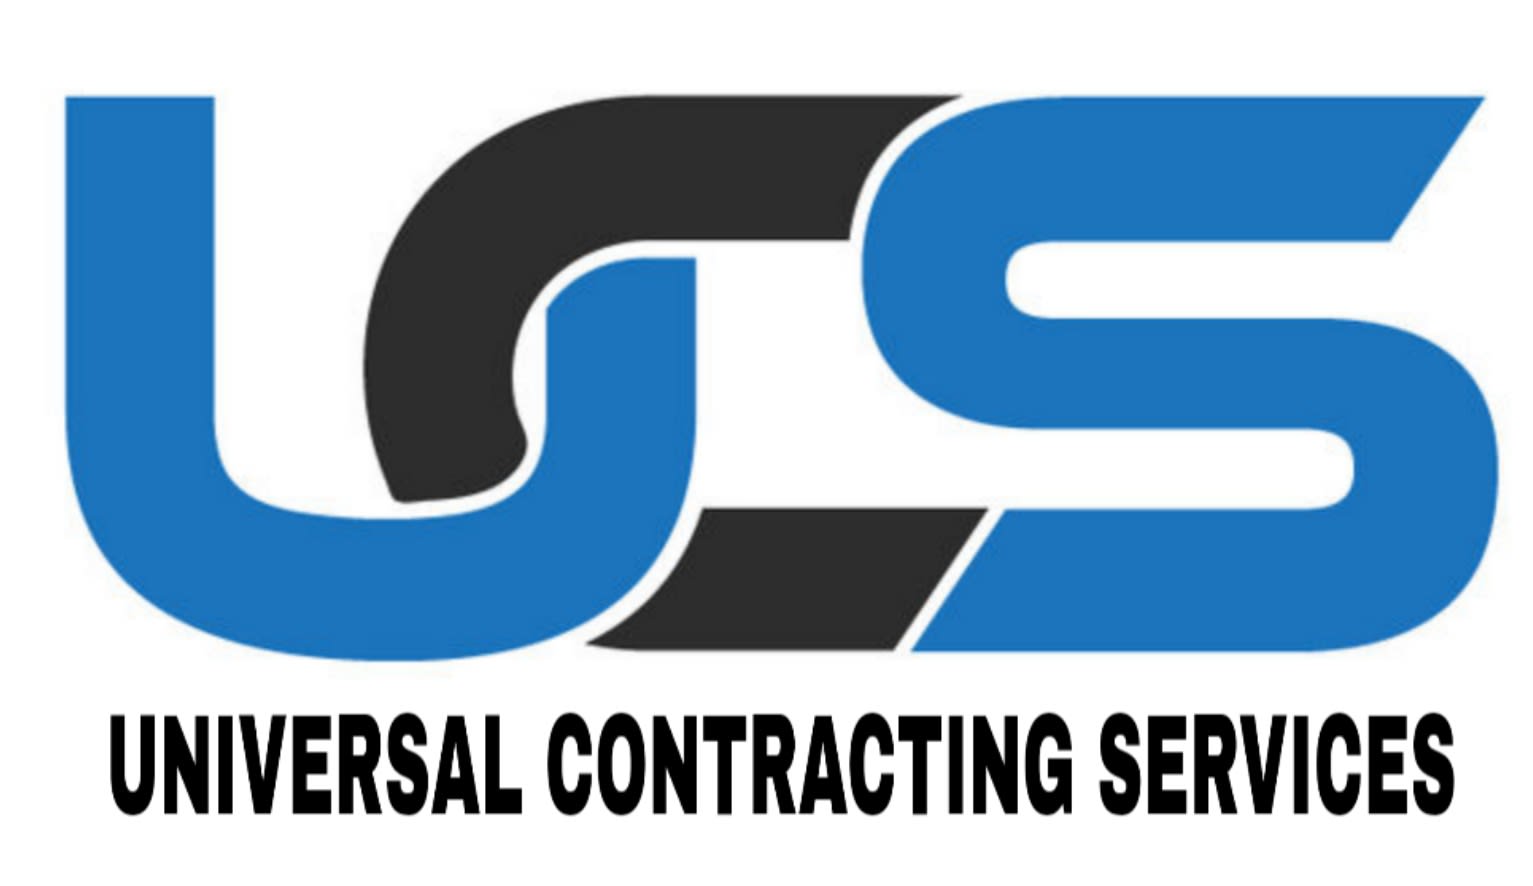 Universal Contracting Services